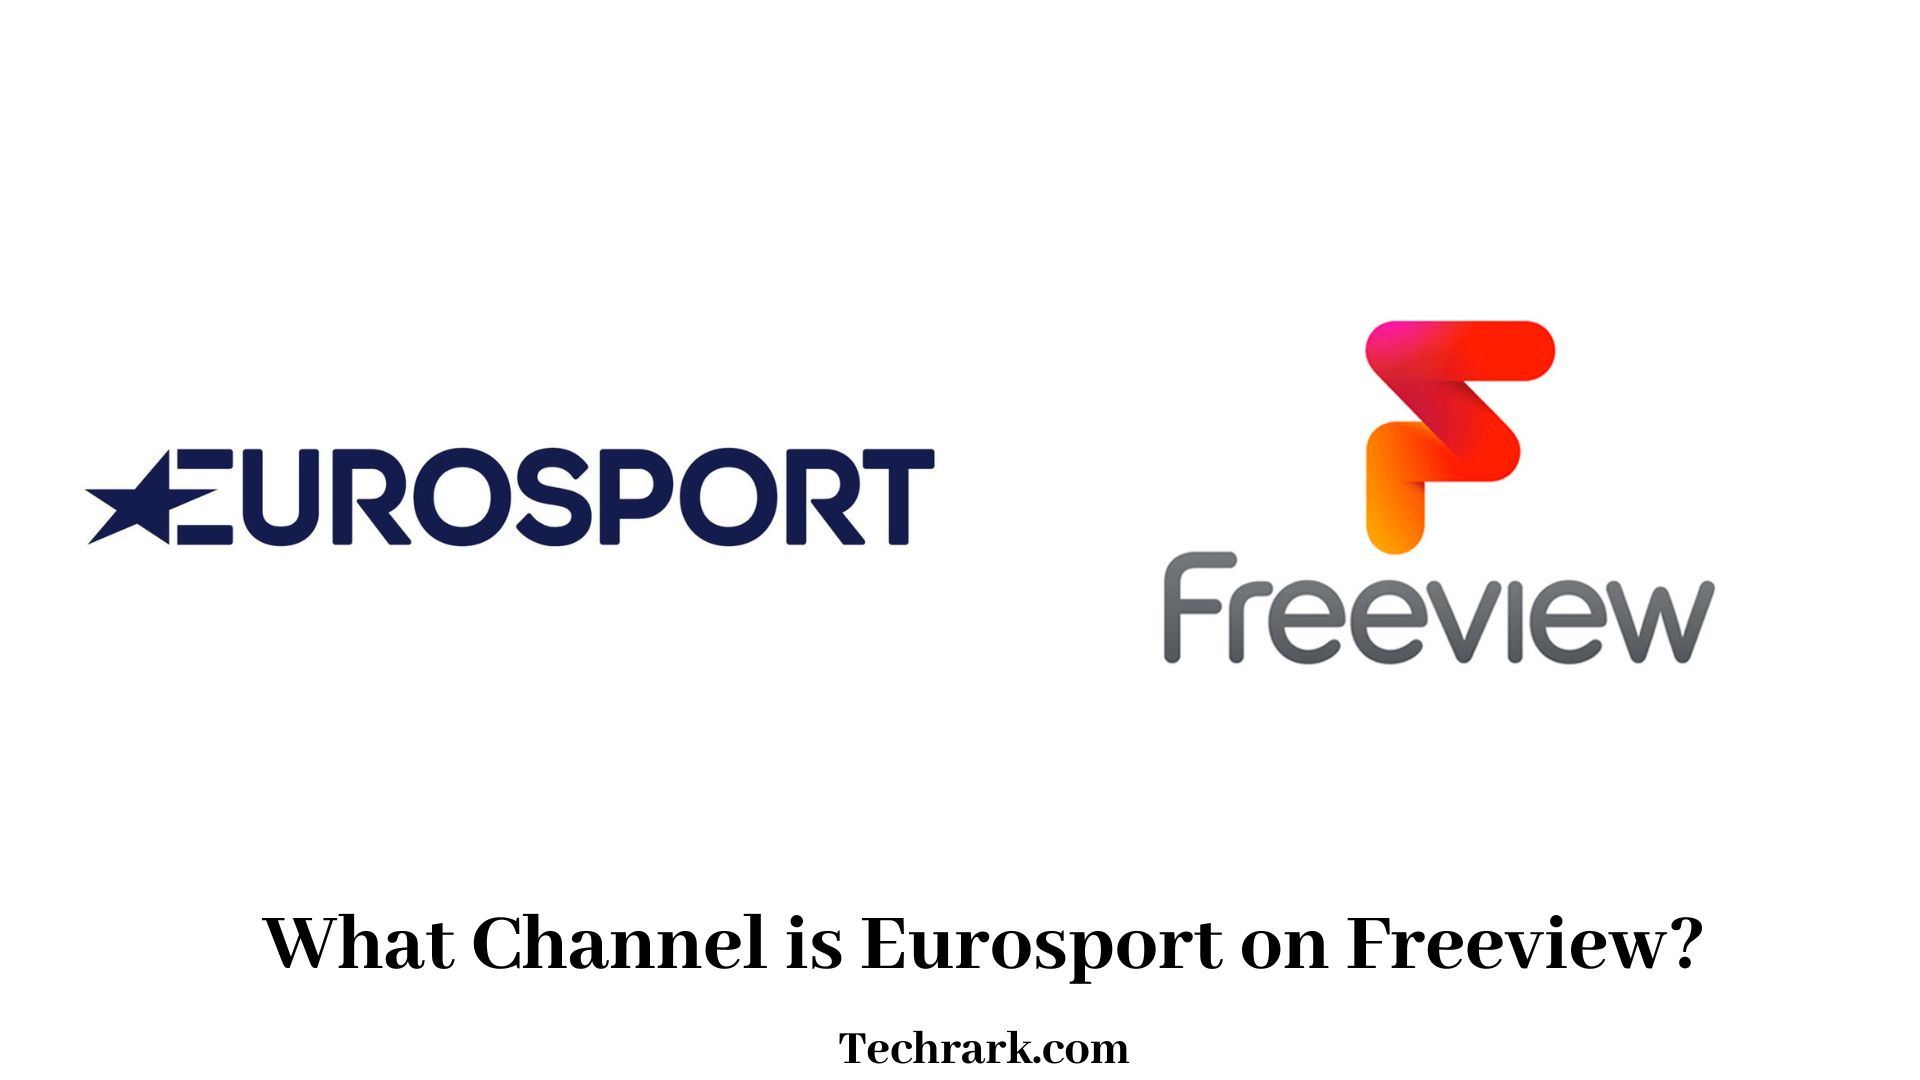 What Channel is Eurosport on Freeview